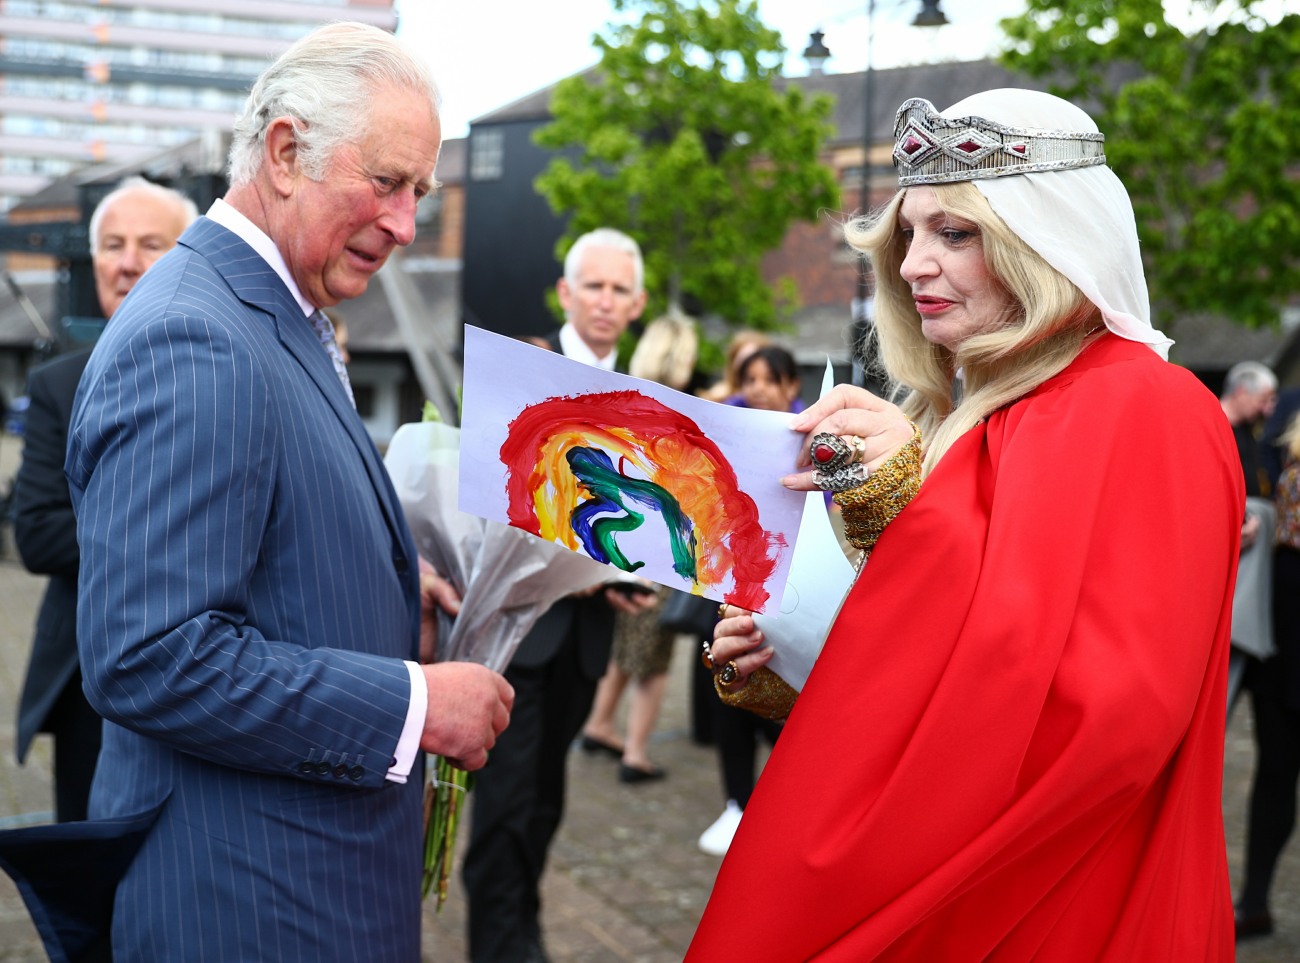 Britain's Prince Charles and Camilla, Duchess of Cornwall, visit Coventry